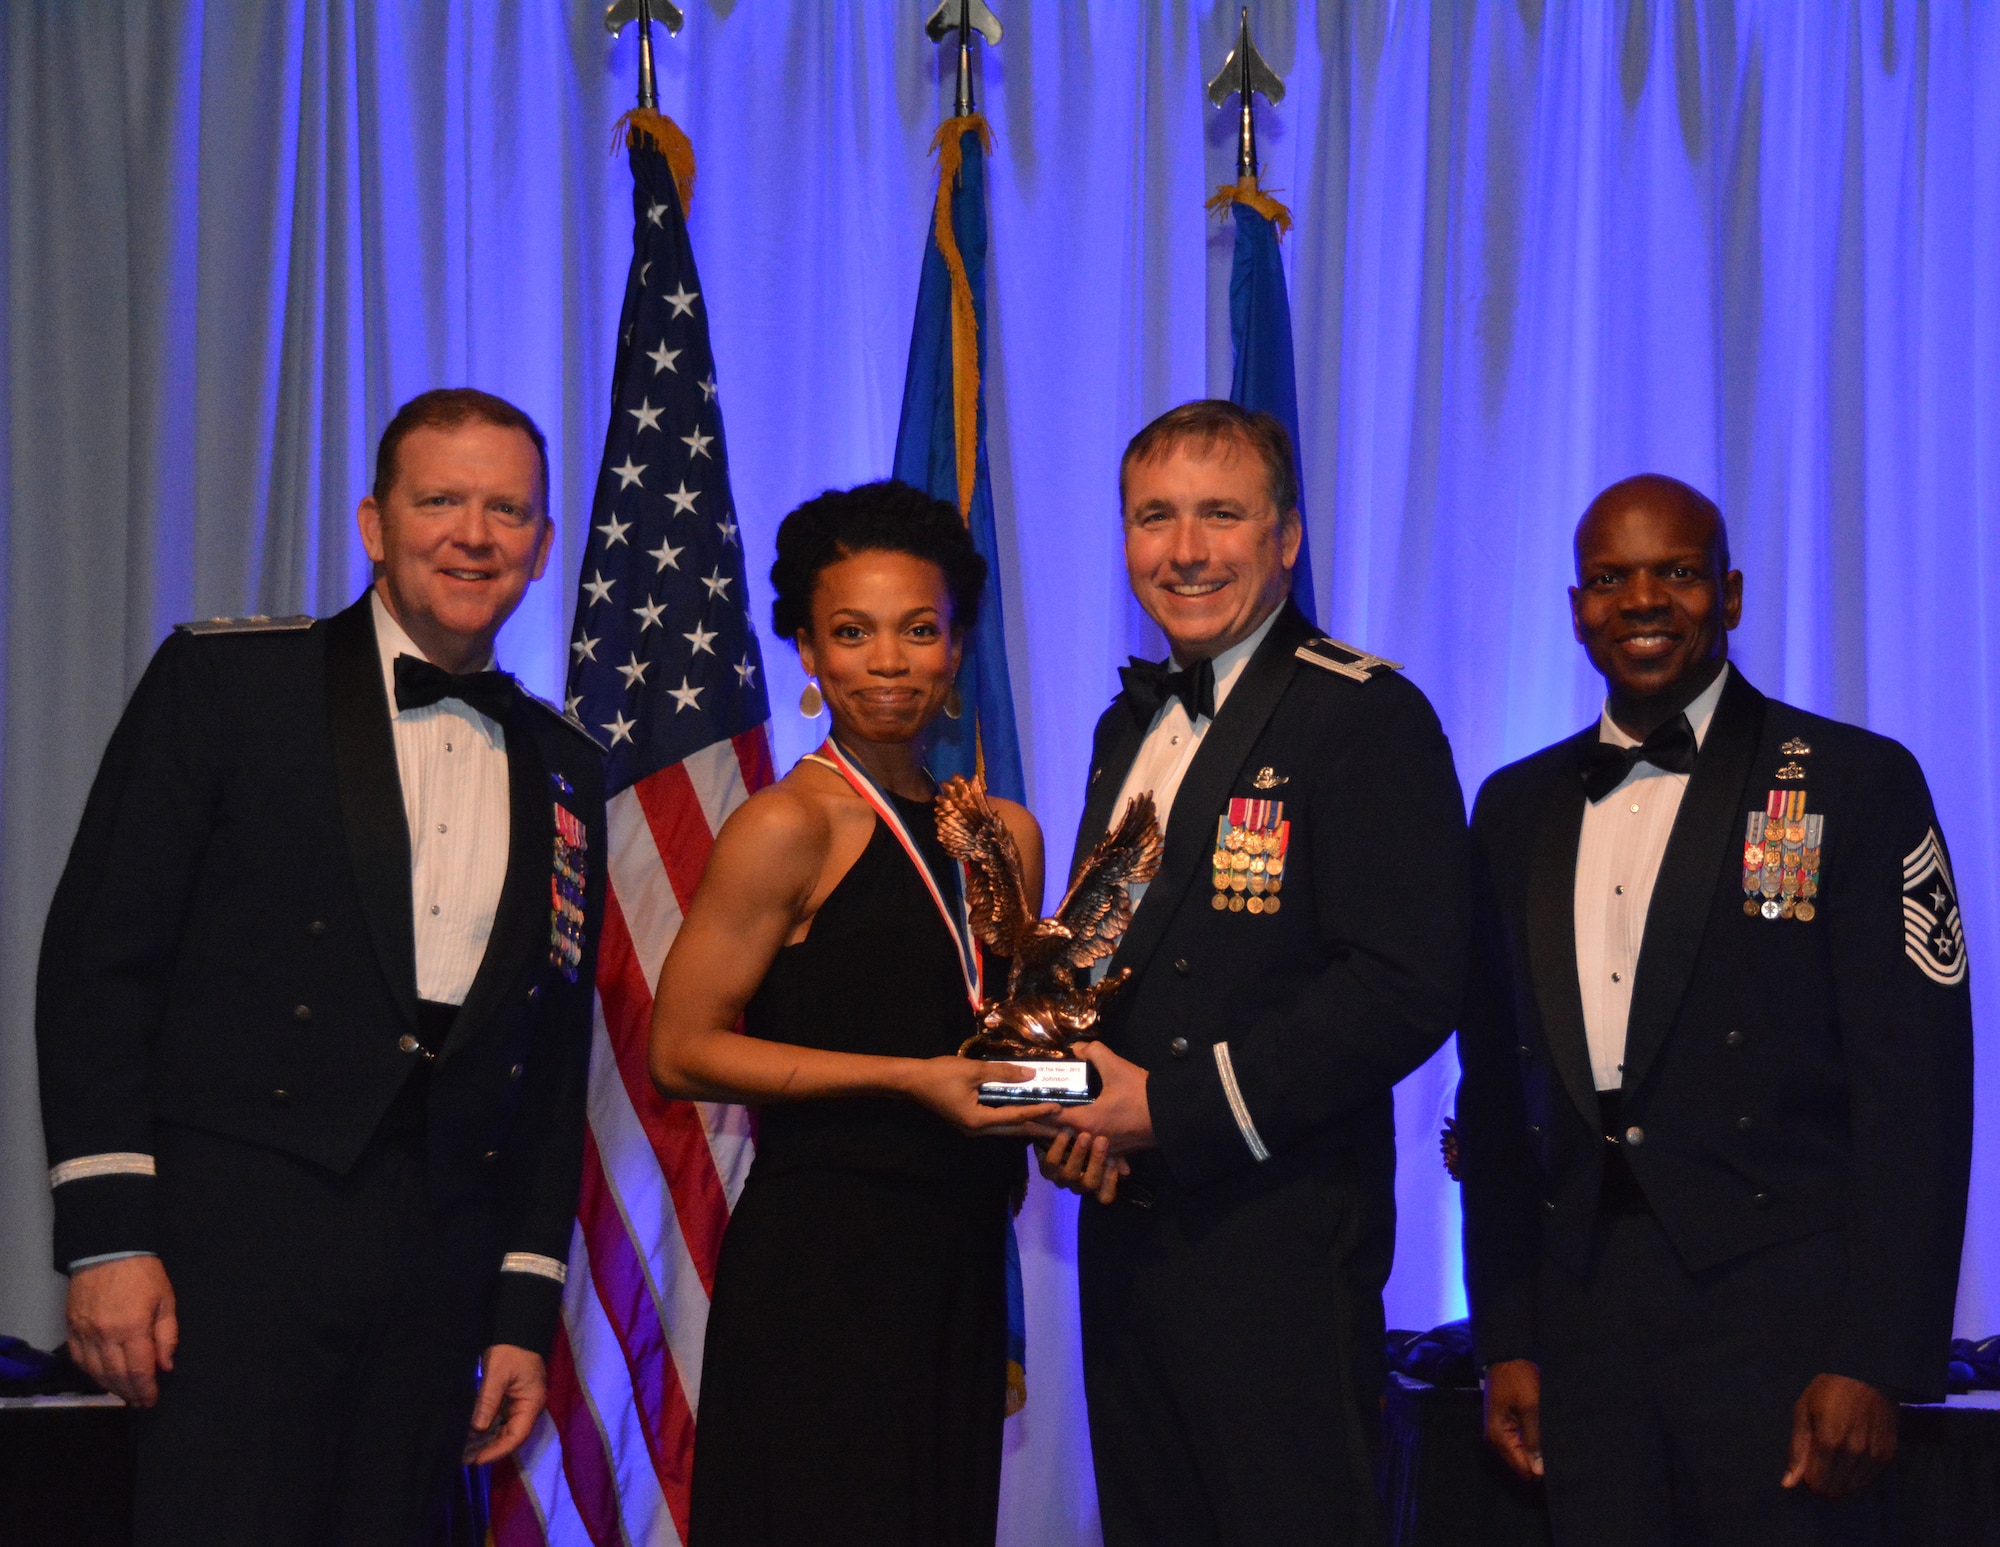 NAVAL AIR STATION FORT WORTH JOINT RESERVE BASE, Texas – Ms. Stephanie Johnson, 44th Fighter Group, Tyndall Air Force Base, Fla., a geographically-separated unit, accepts the 2015 Civilian of the Year Category I award from Col. John Breazeale, 301st Fighter Wing commander, Feb. 20 at the Fort Worth Stockyards, Texas. The award was presented during a formal banquet held annually to recognize the dedication and service of outstanding wing members. (U.S. Air Force photo by Staff Sgt. Samantha Mathison)